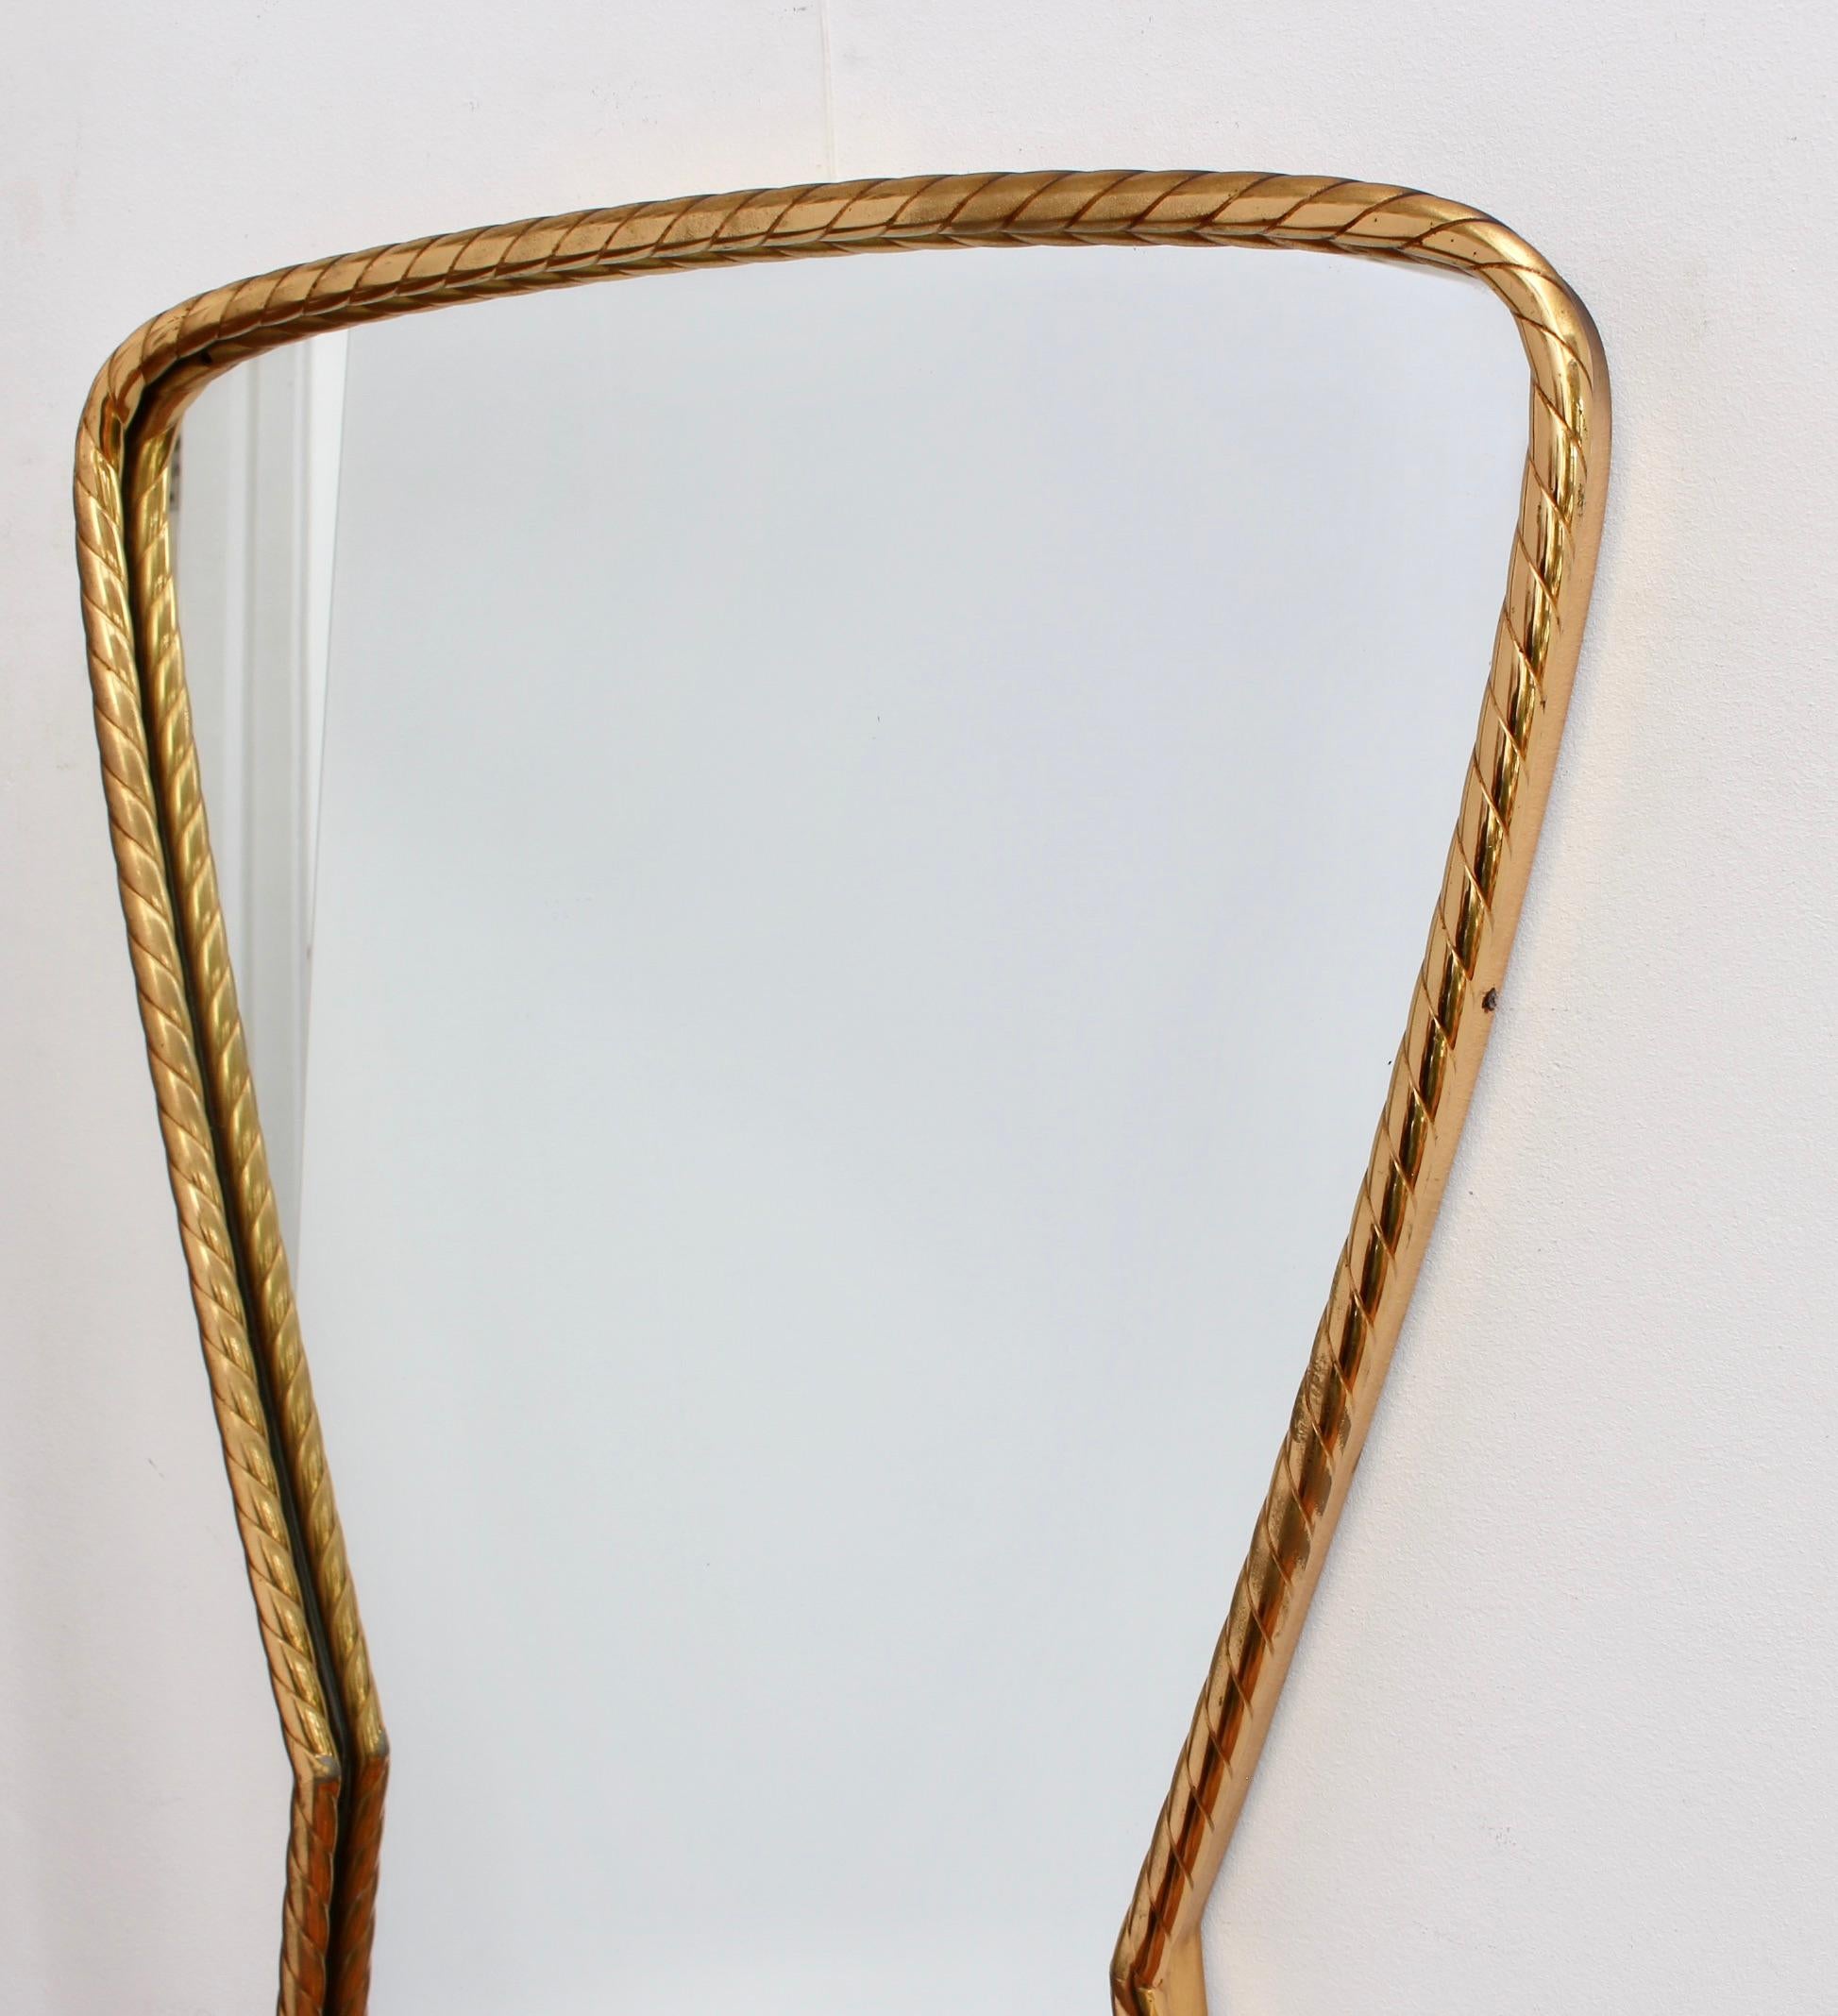 Midcentury Italian Keyhole-Shaped Wall Mirror with Rope Pattern Brass Frame 3